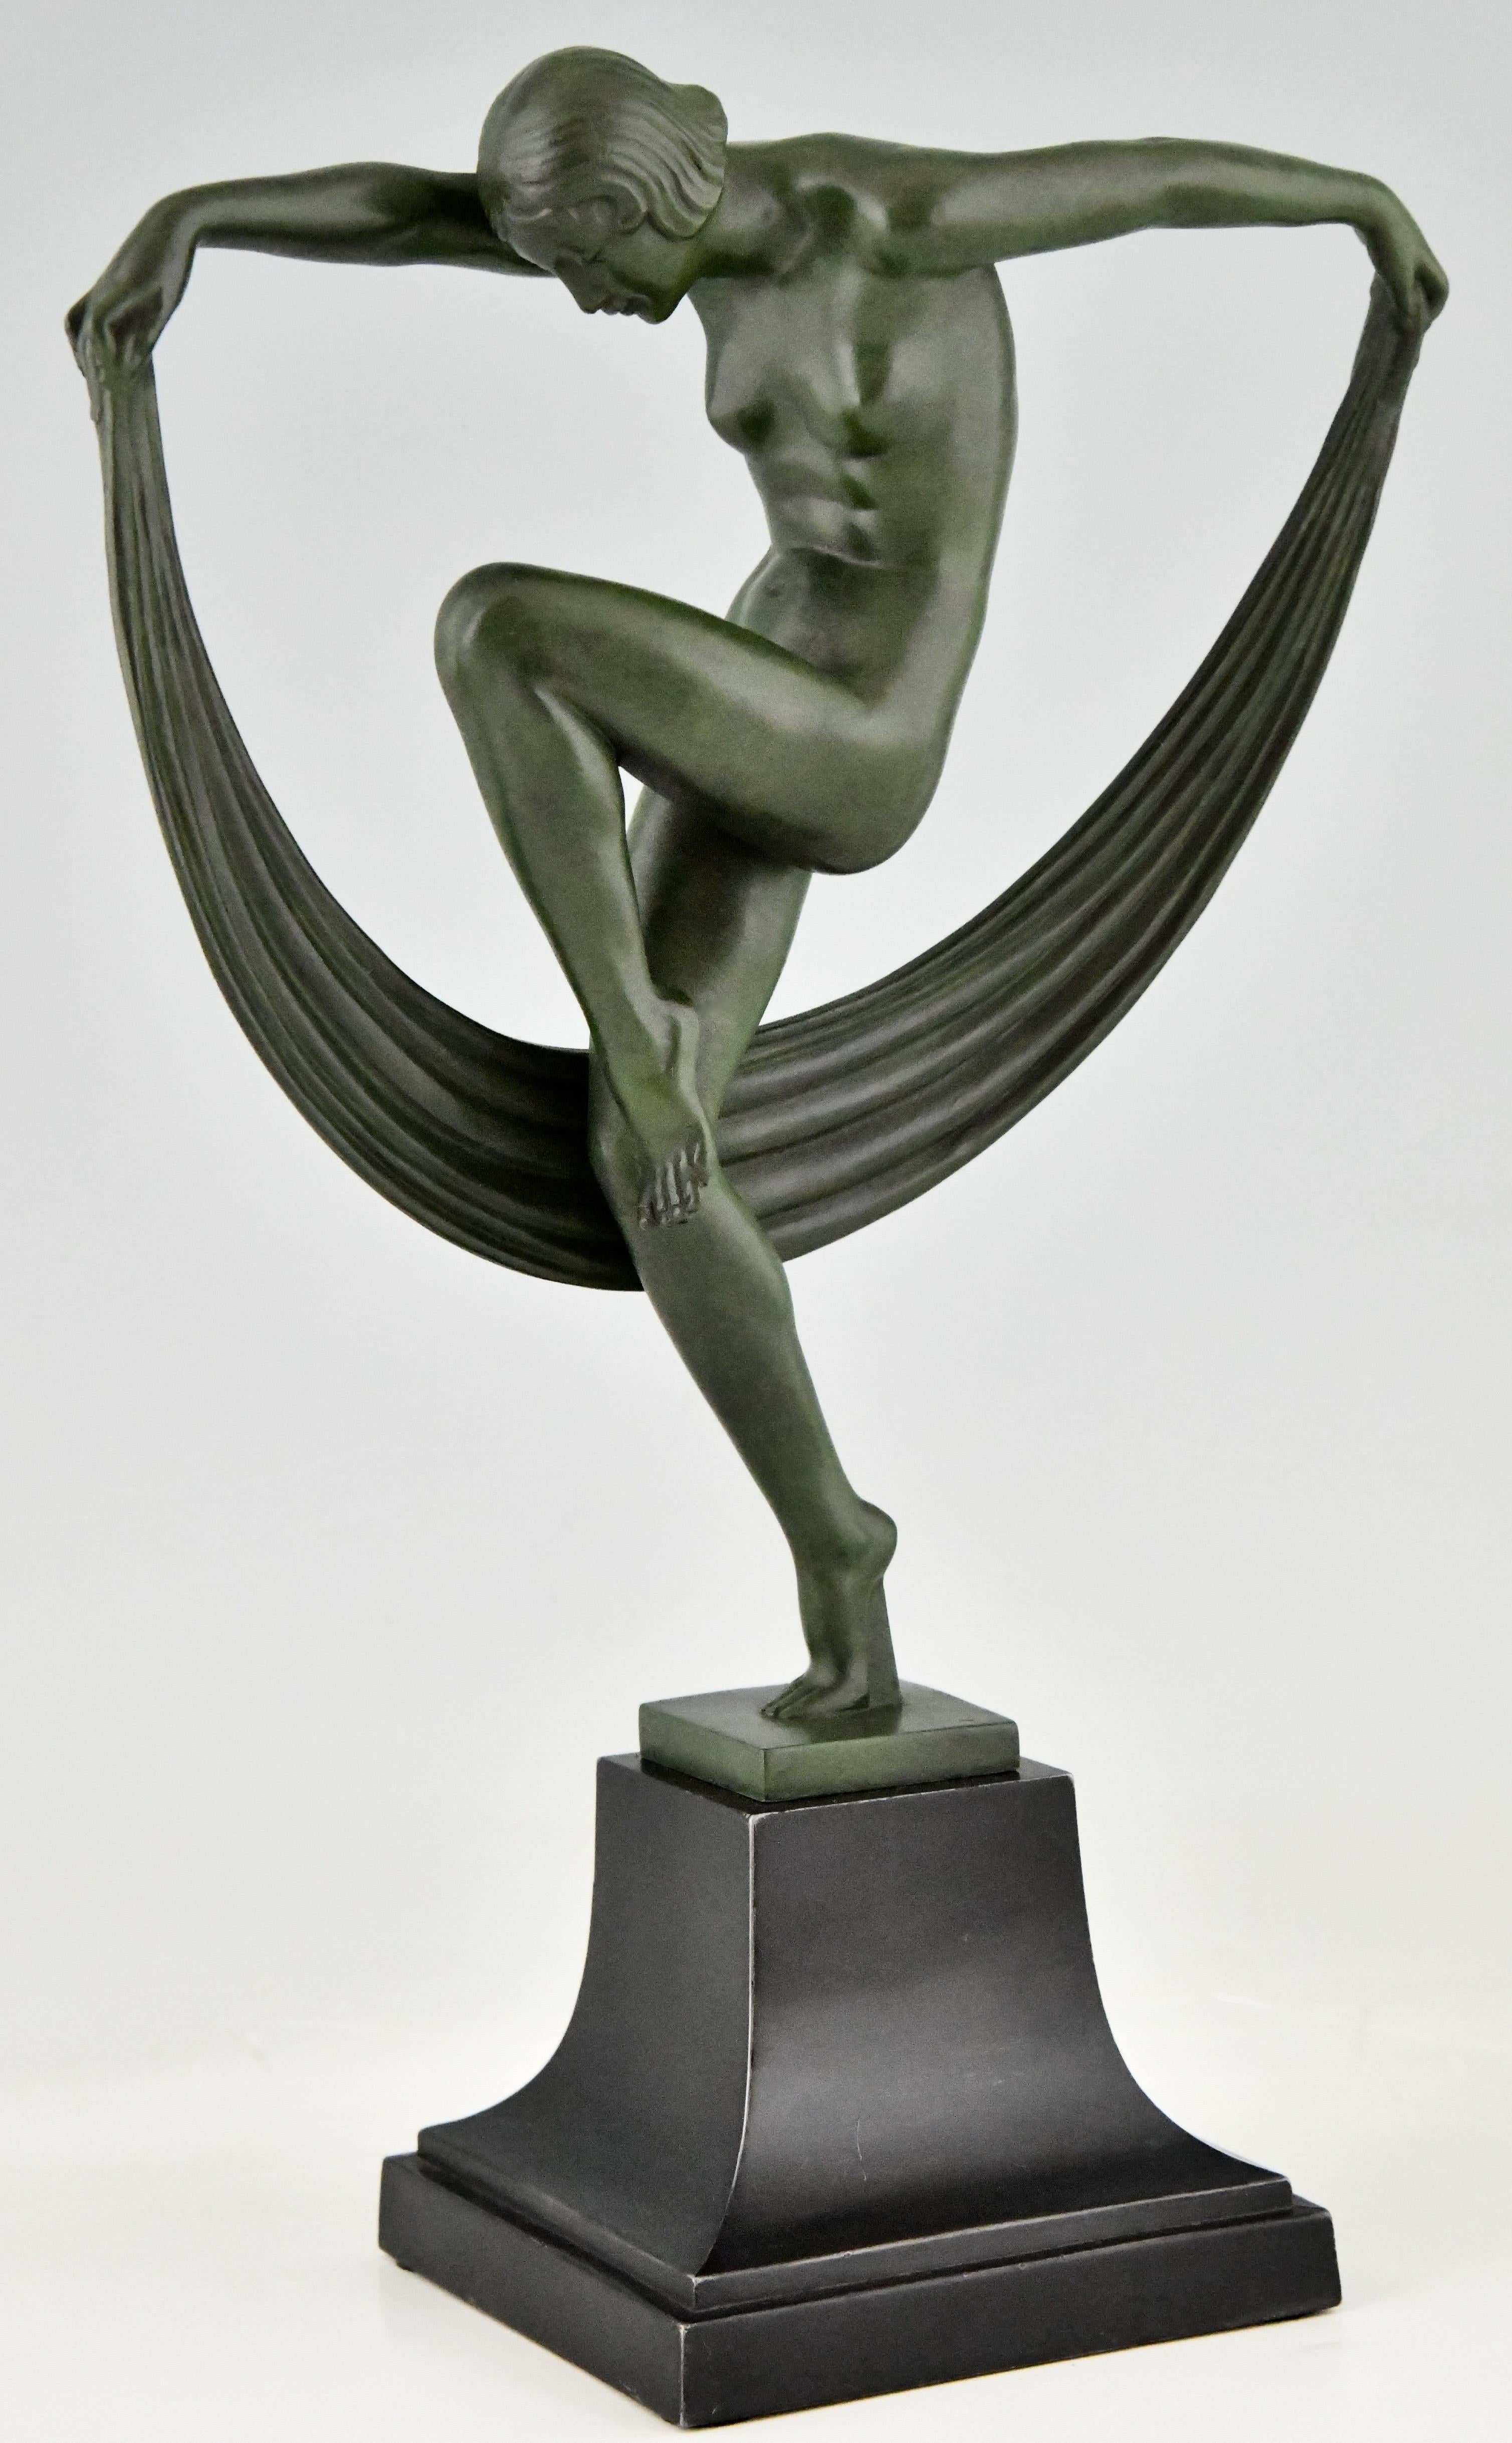 Folie, elegant Art Deco sculpture of a nude dancer with scarf signed by Denis, cast at the Max Le Verrier foundry in France, circa 1930. 
Patinated Art Metal. 

This sculpture is illustrated in:
 “Bronzes, sculptors and founders” by H. Berman,